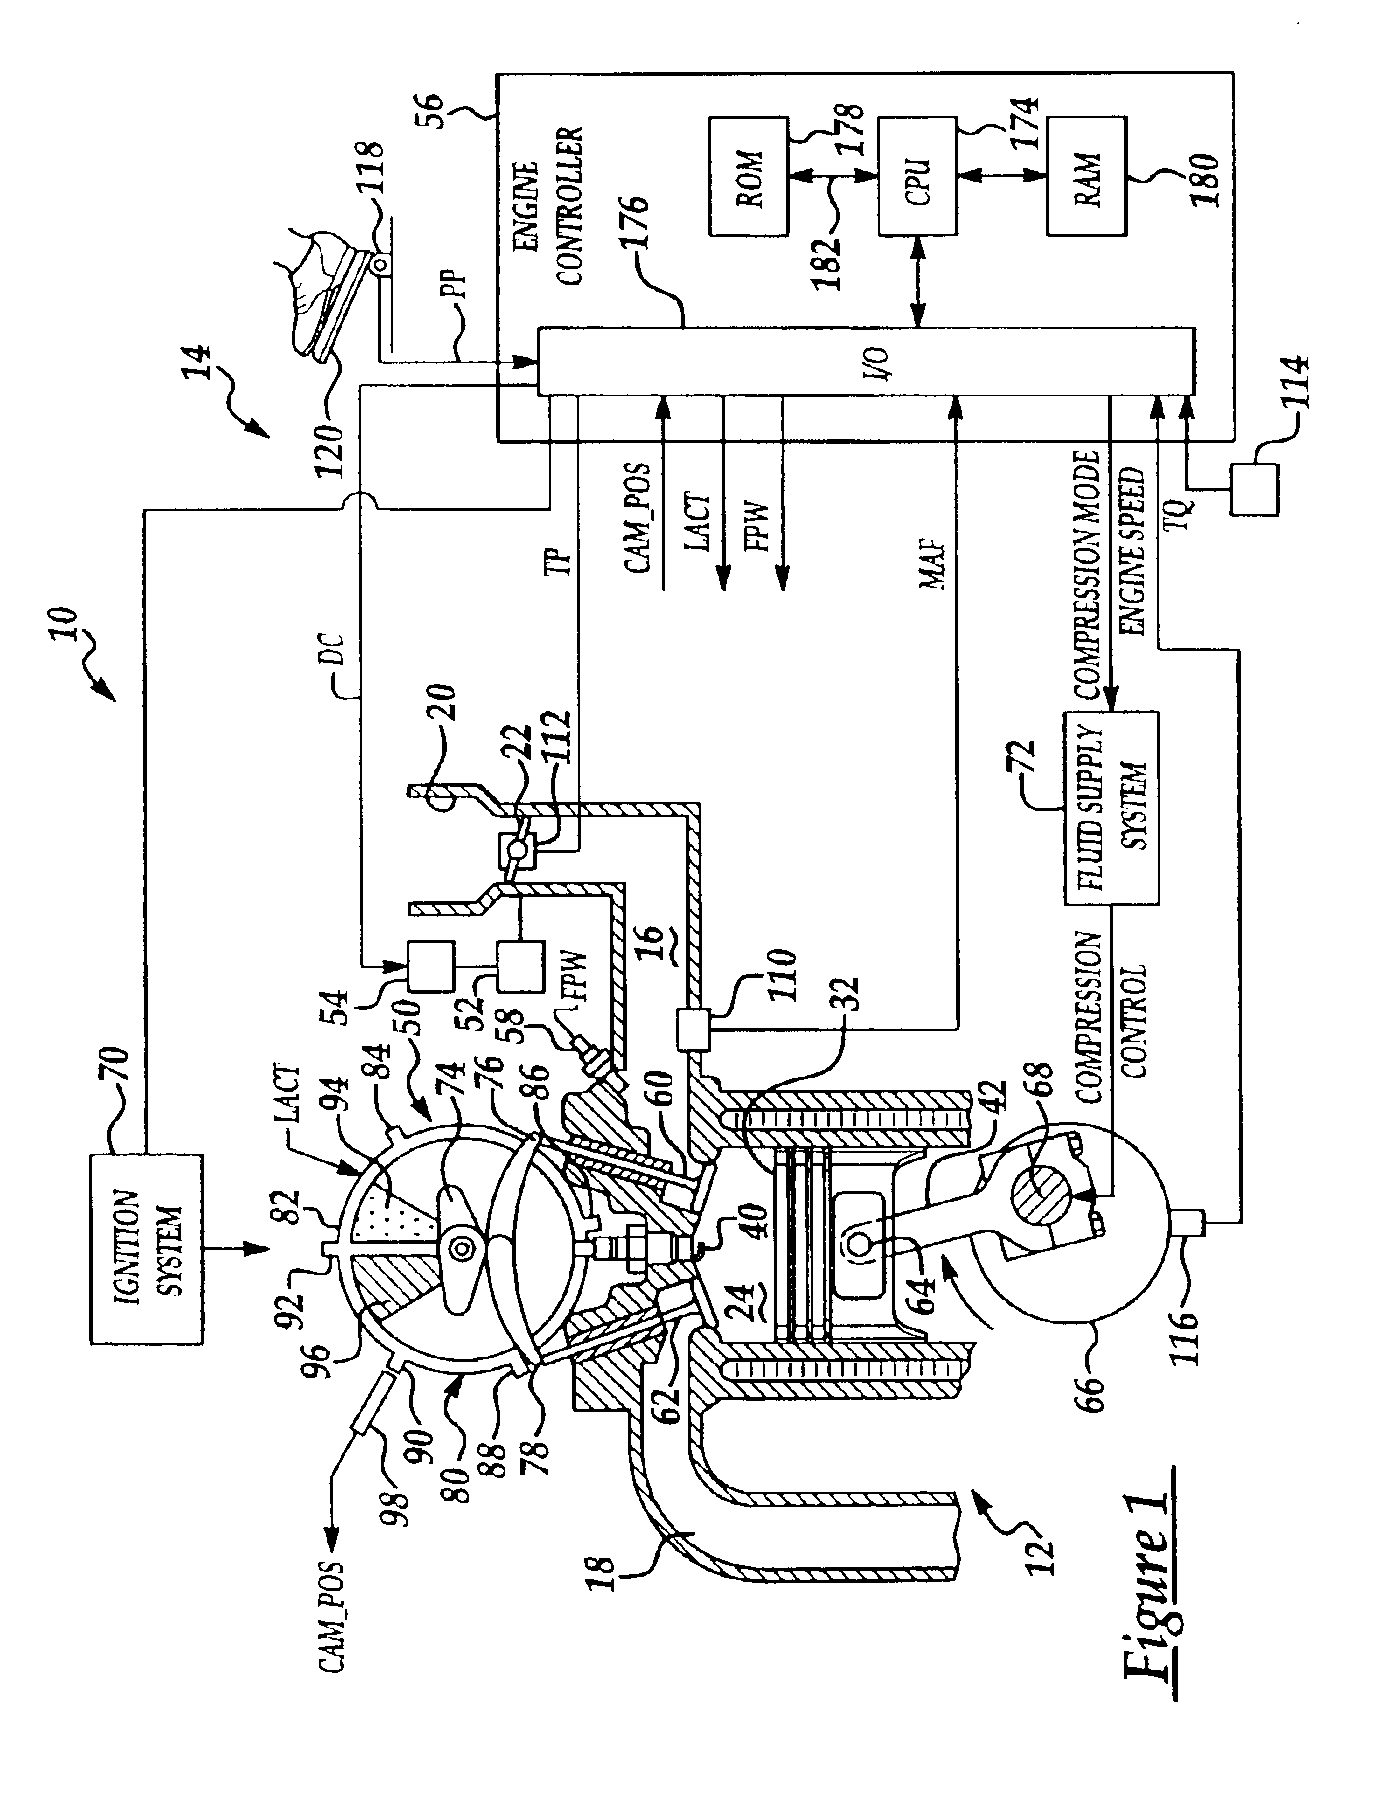 Engine control with operating mode detection